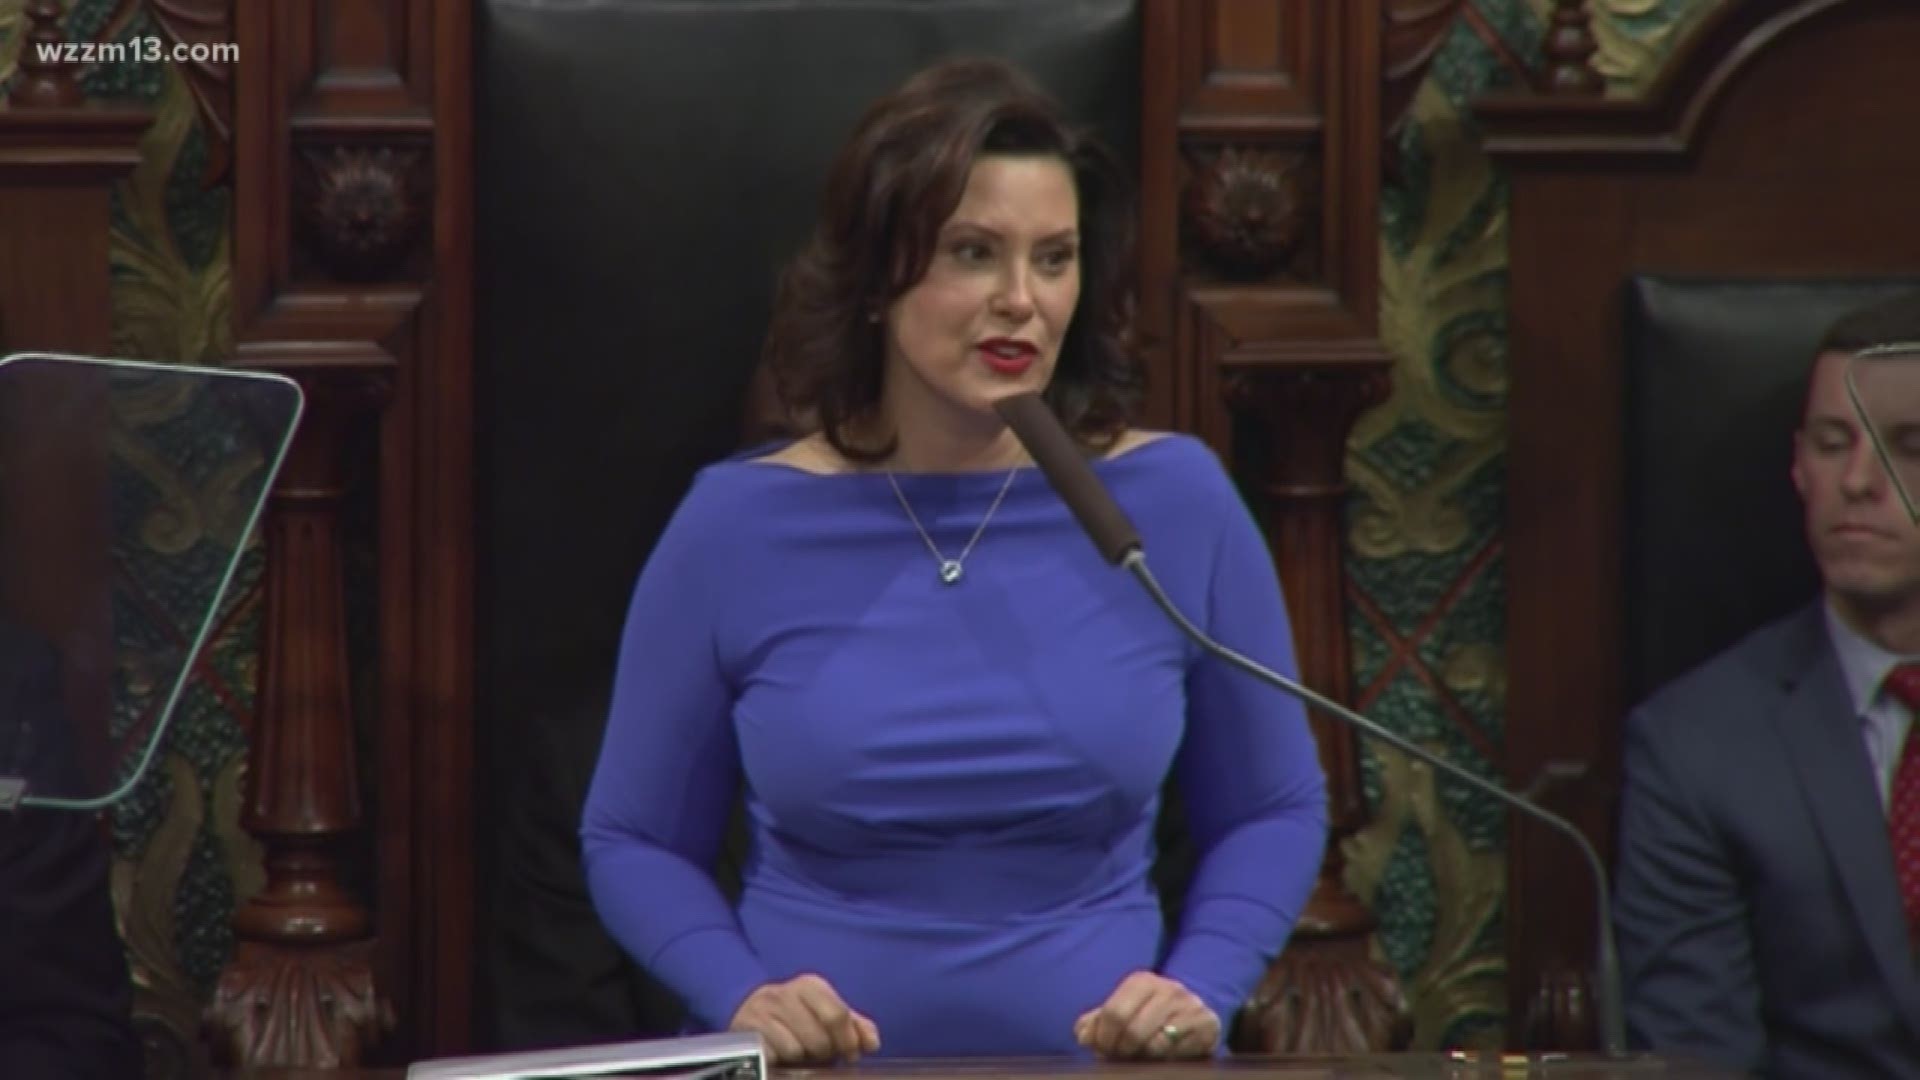 Recap of Gov. Whitmer's first State of the State address